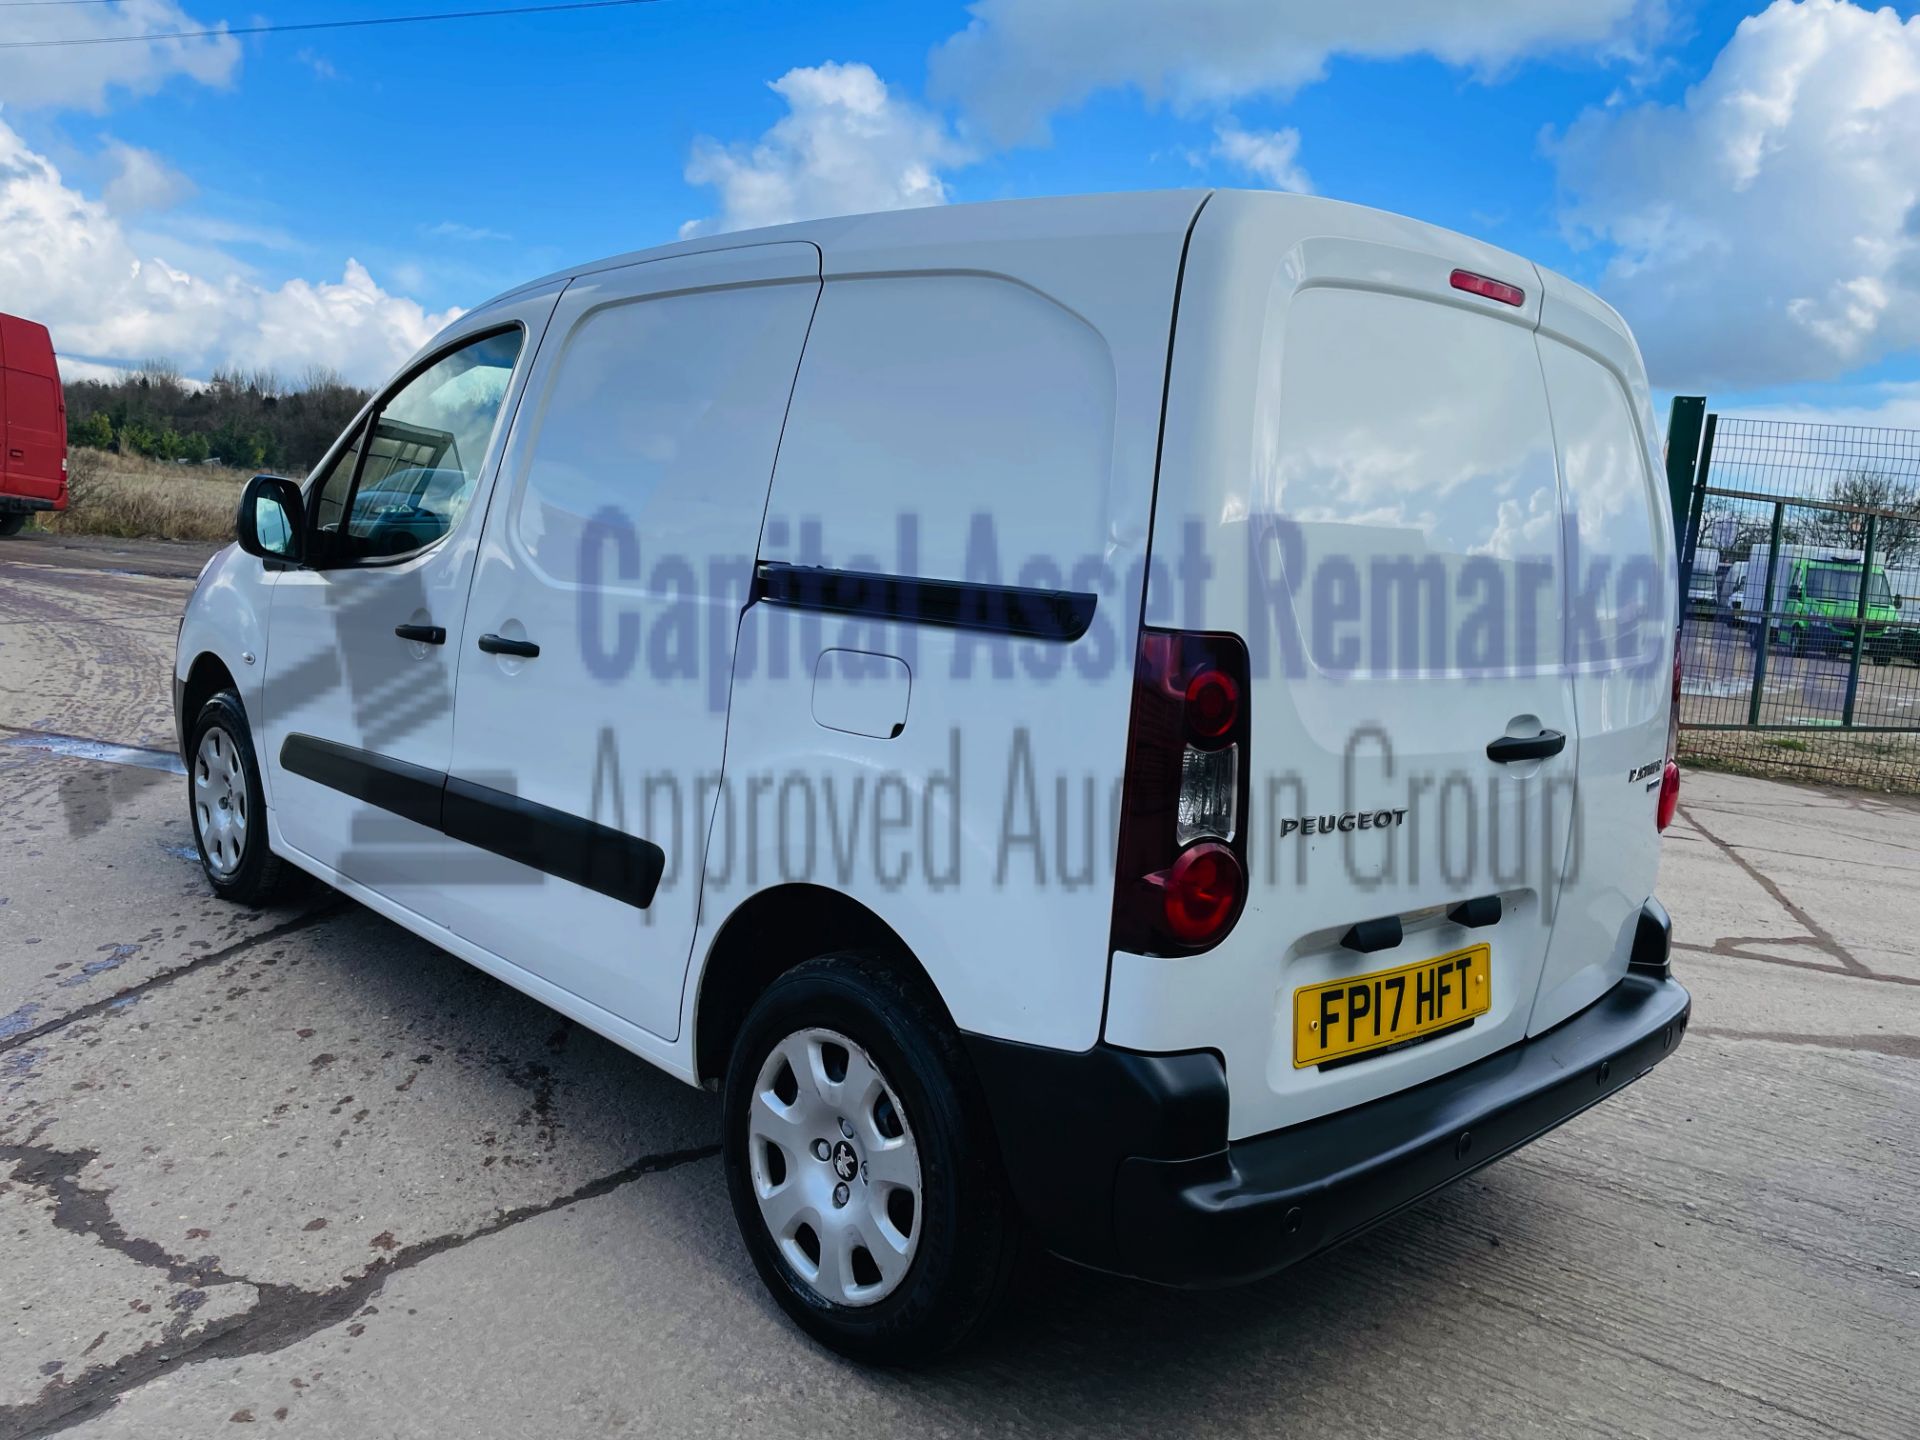 PEUGEOT PARTNER *PROFESSIONAL* PANEL VAN (2017 - EURO 6) '1.6 BLUE HDI' *AIR CON & CRUISE* (1 OWNER) - Image 10 of 34